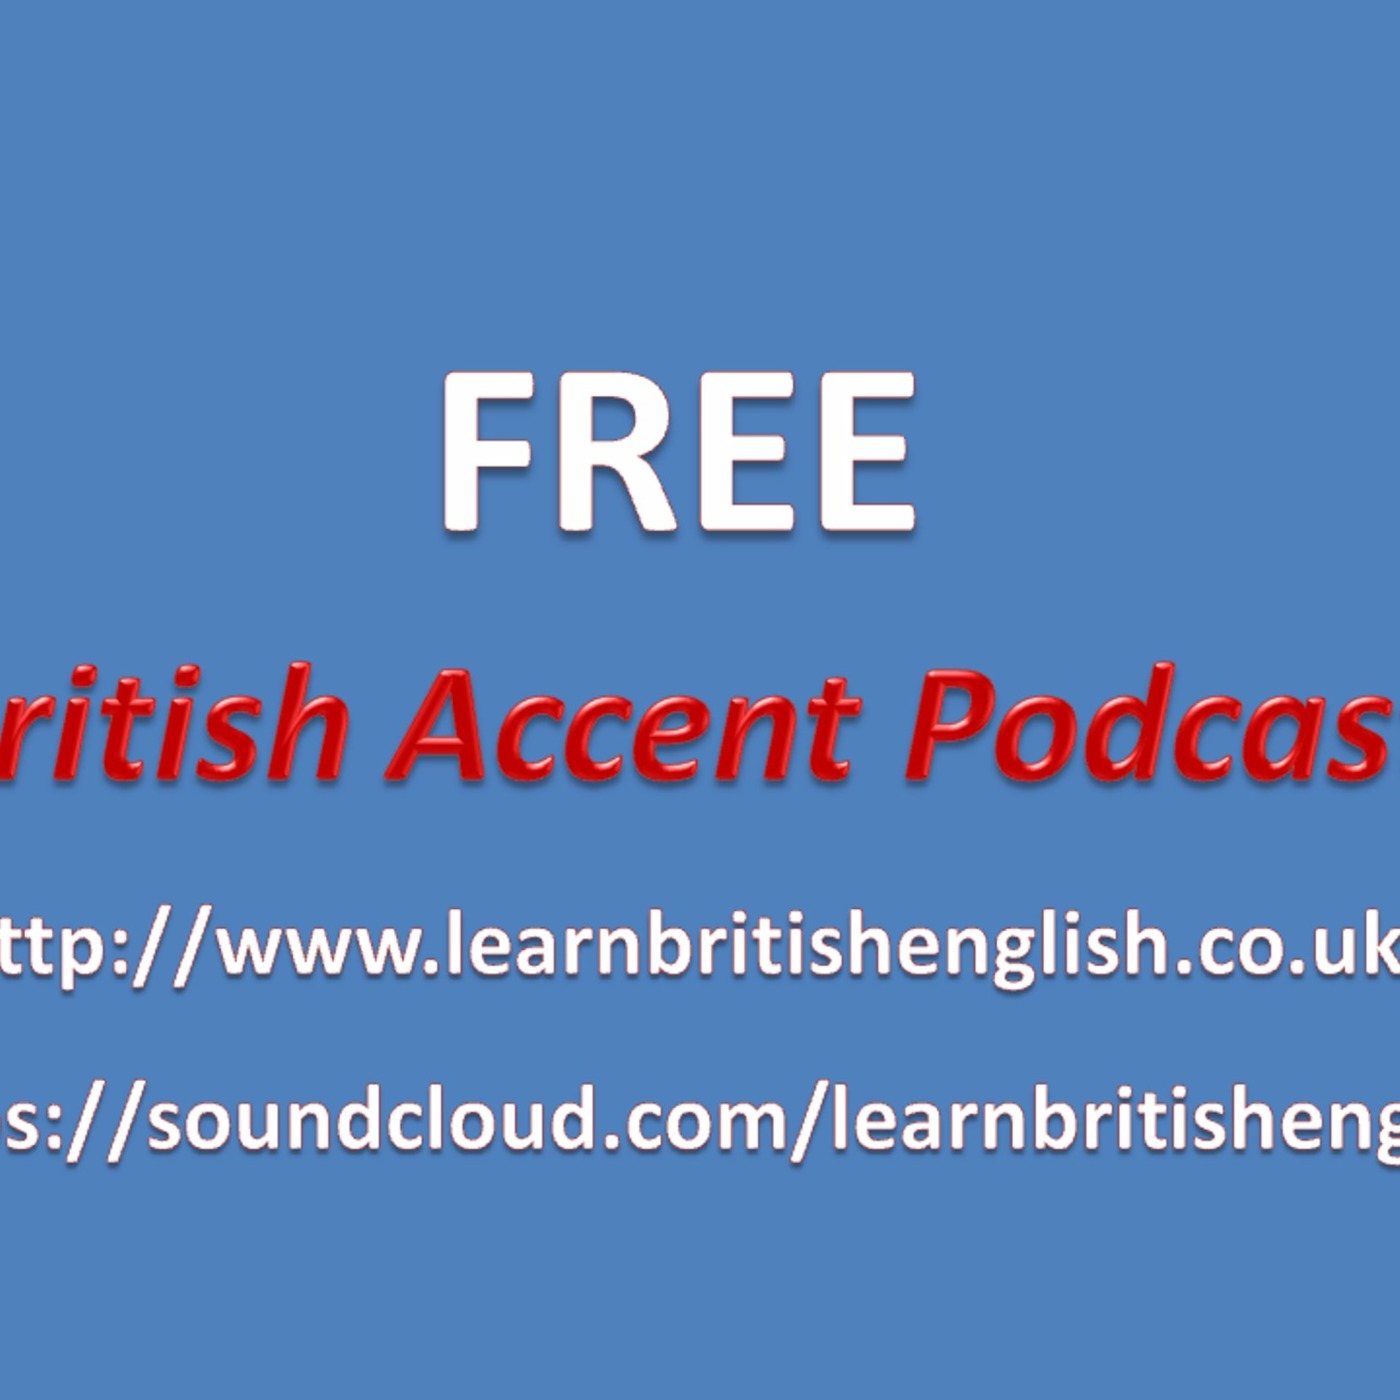 British Accent Podcast 37: Swear Words (Rude / Bad Words)